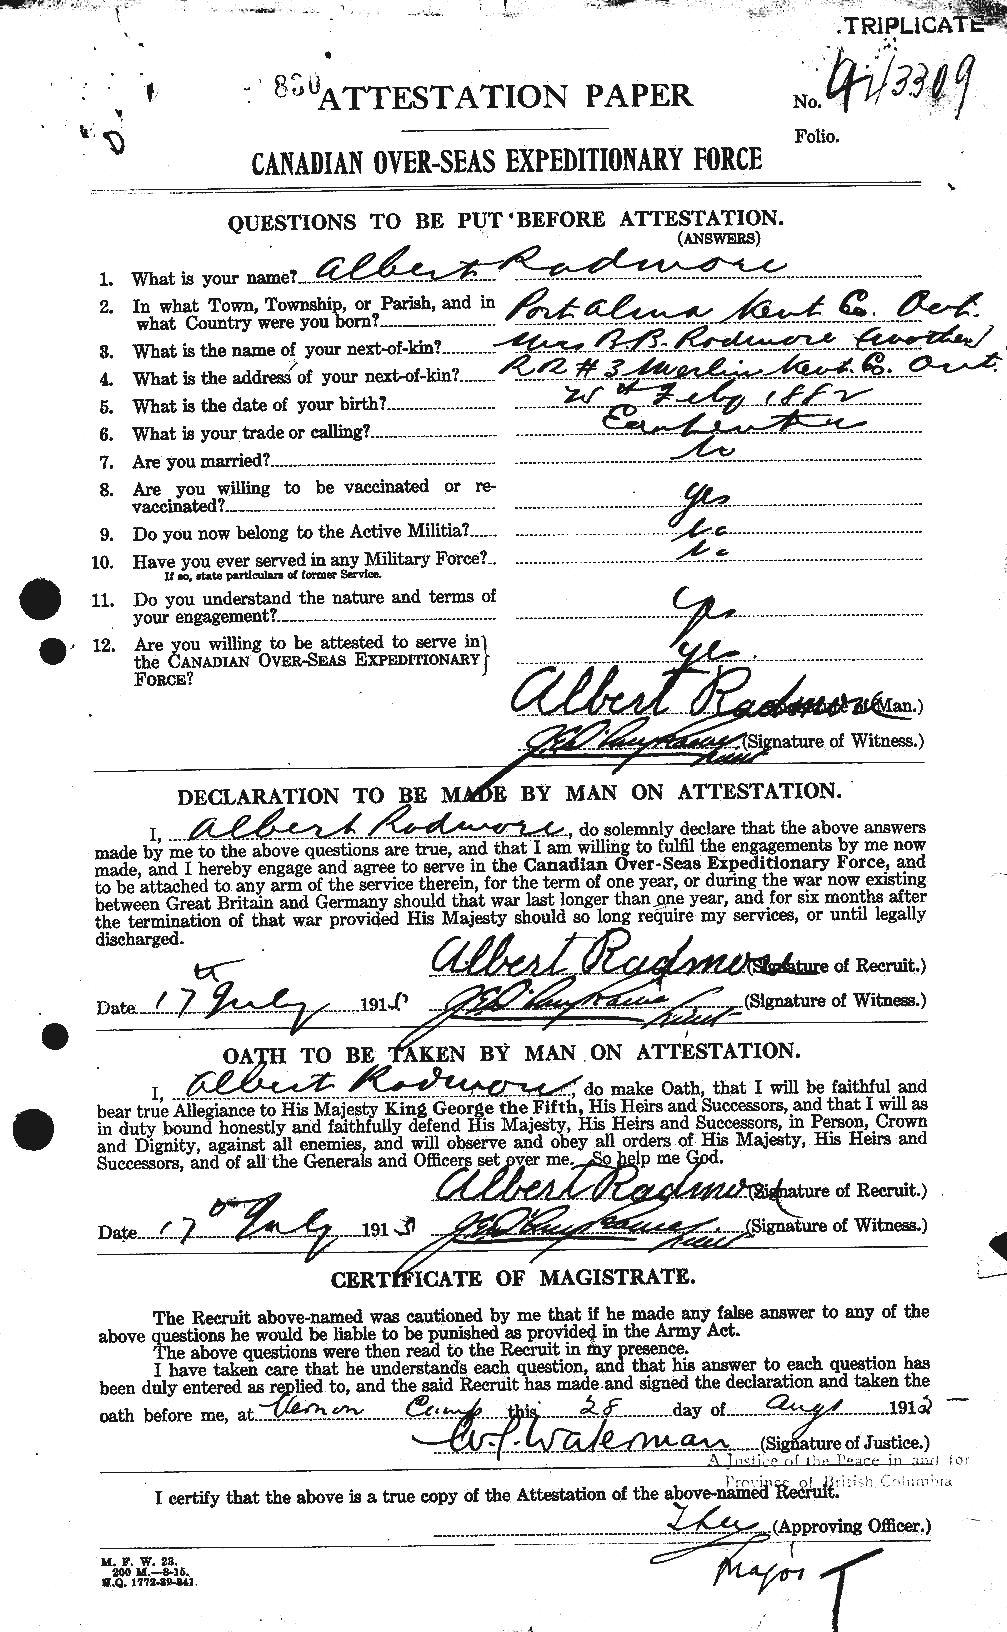 Personnel Records of the First World War - CEF 591131a